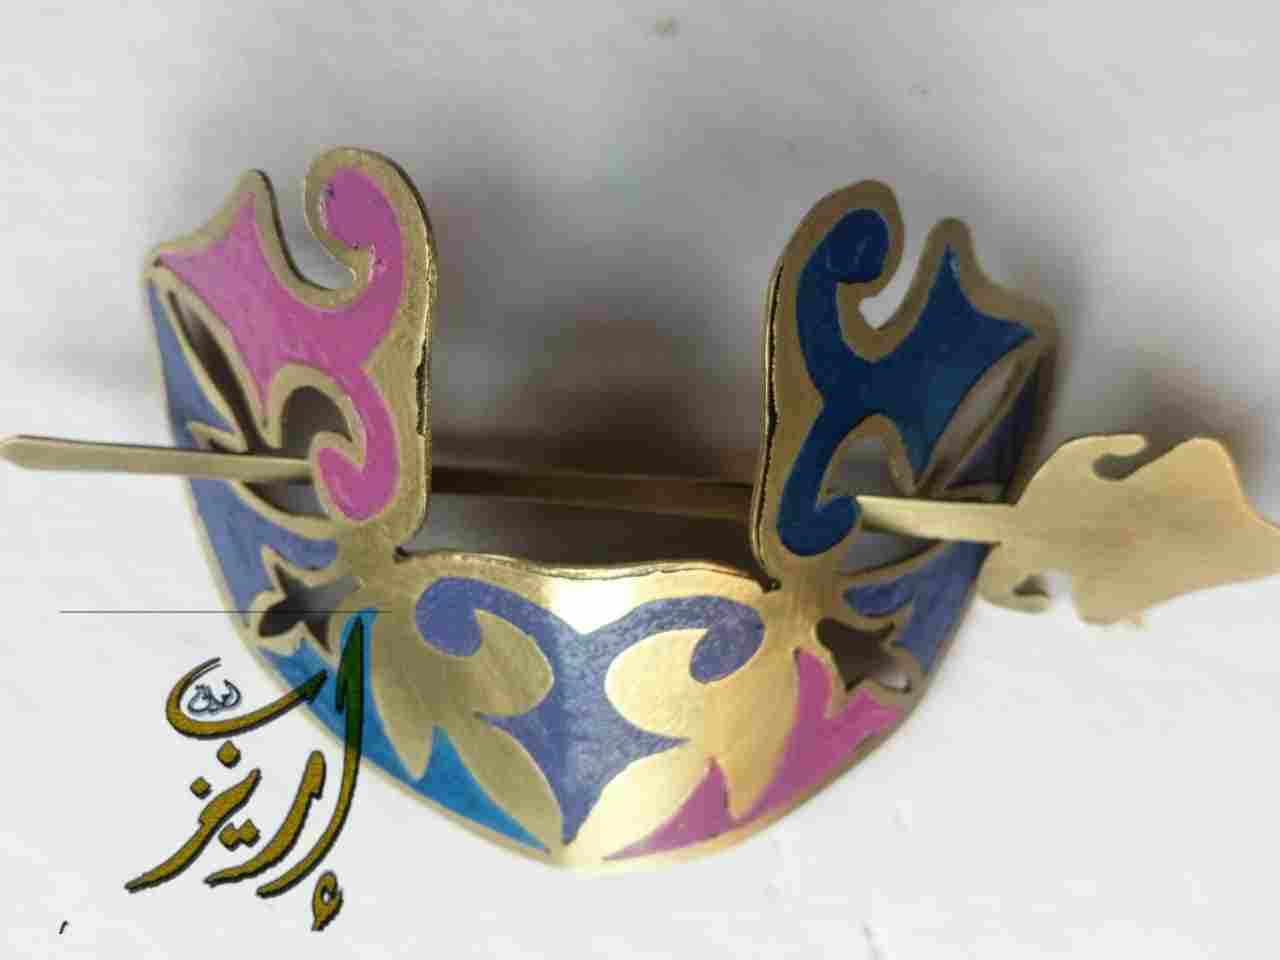 Copper hair pin engraved and colored with enamel colors